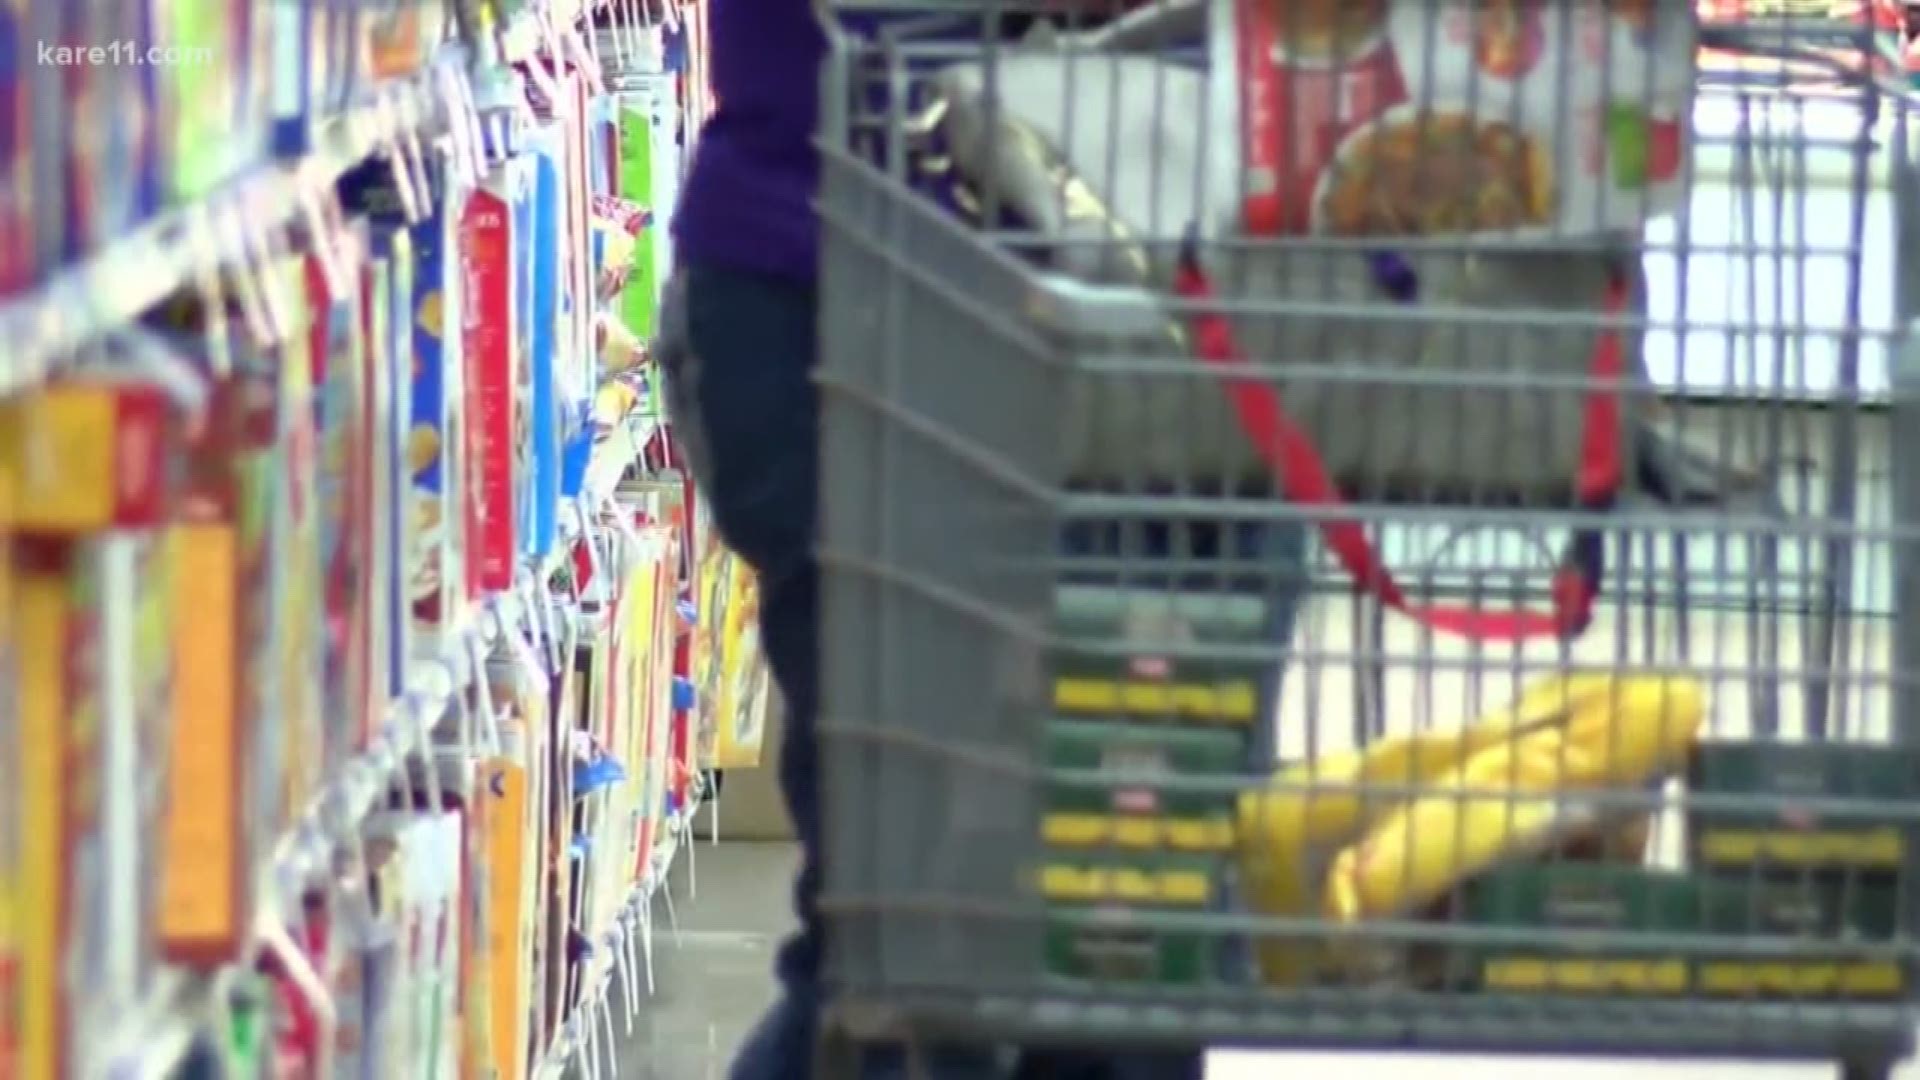 Do you follow the "use by" or "best by" labels on food? A new study says most Americans aren't reading them the right way and are wasting food in the process. https://kare11.tv/2BPqiPf